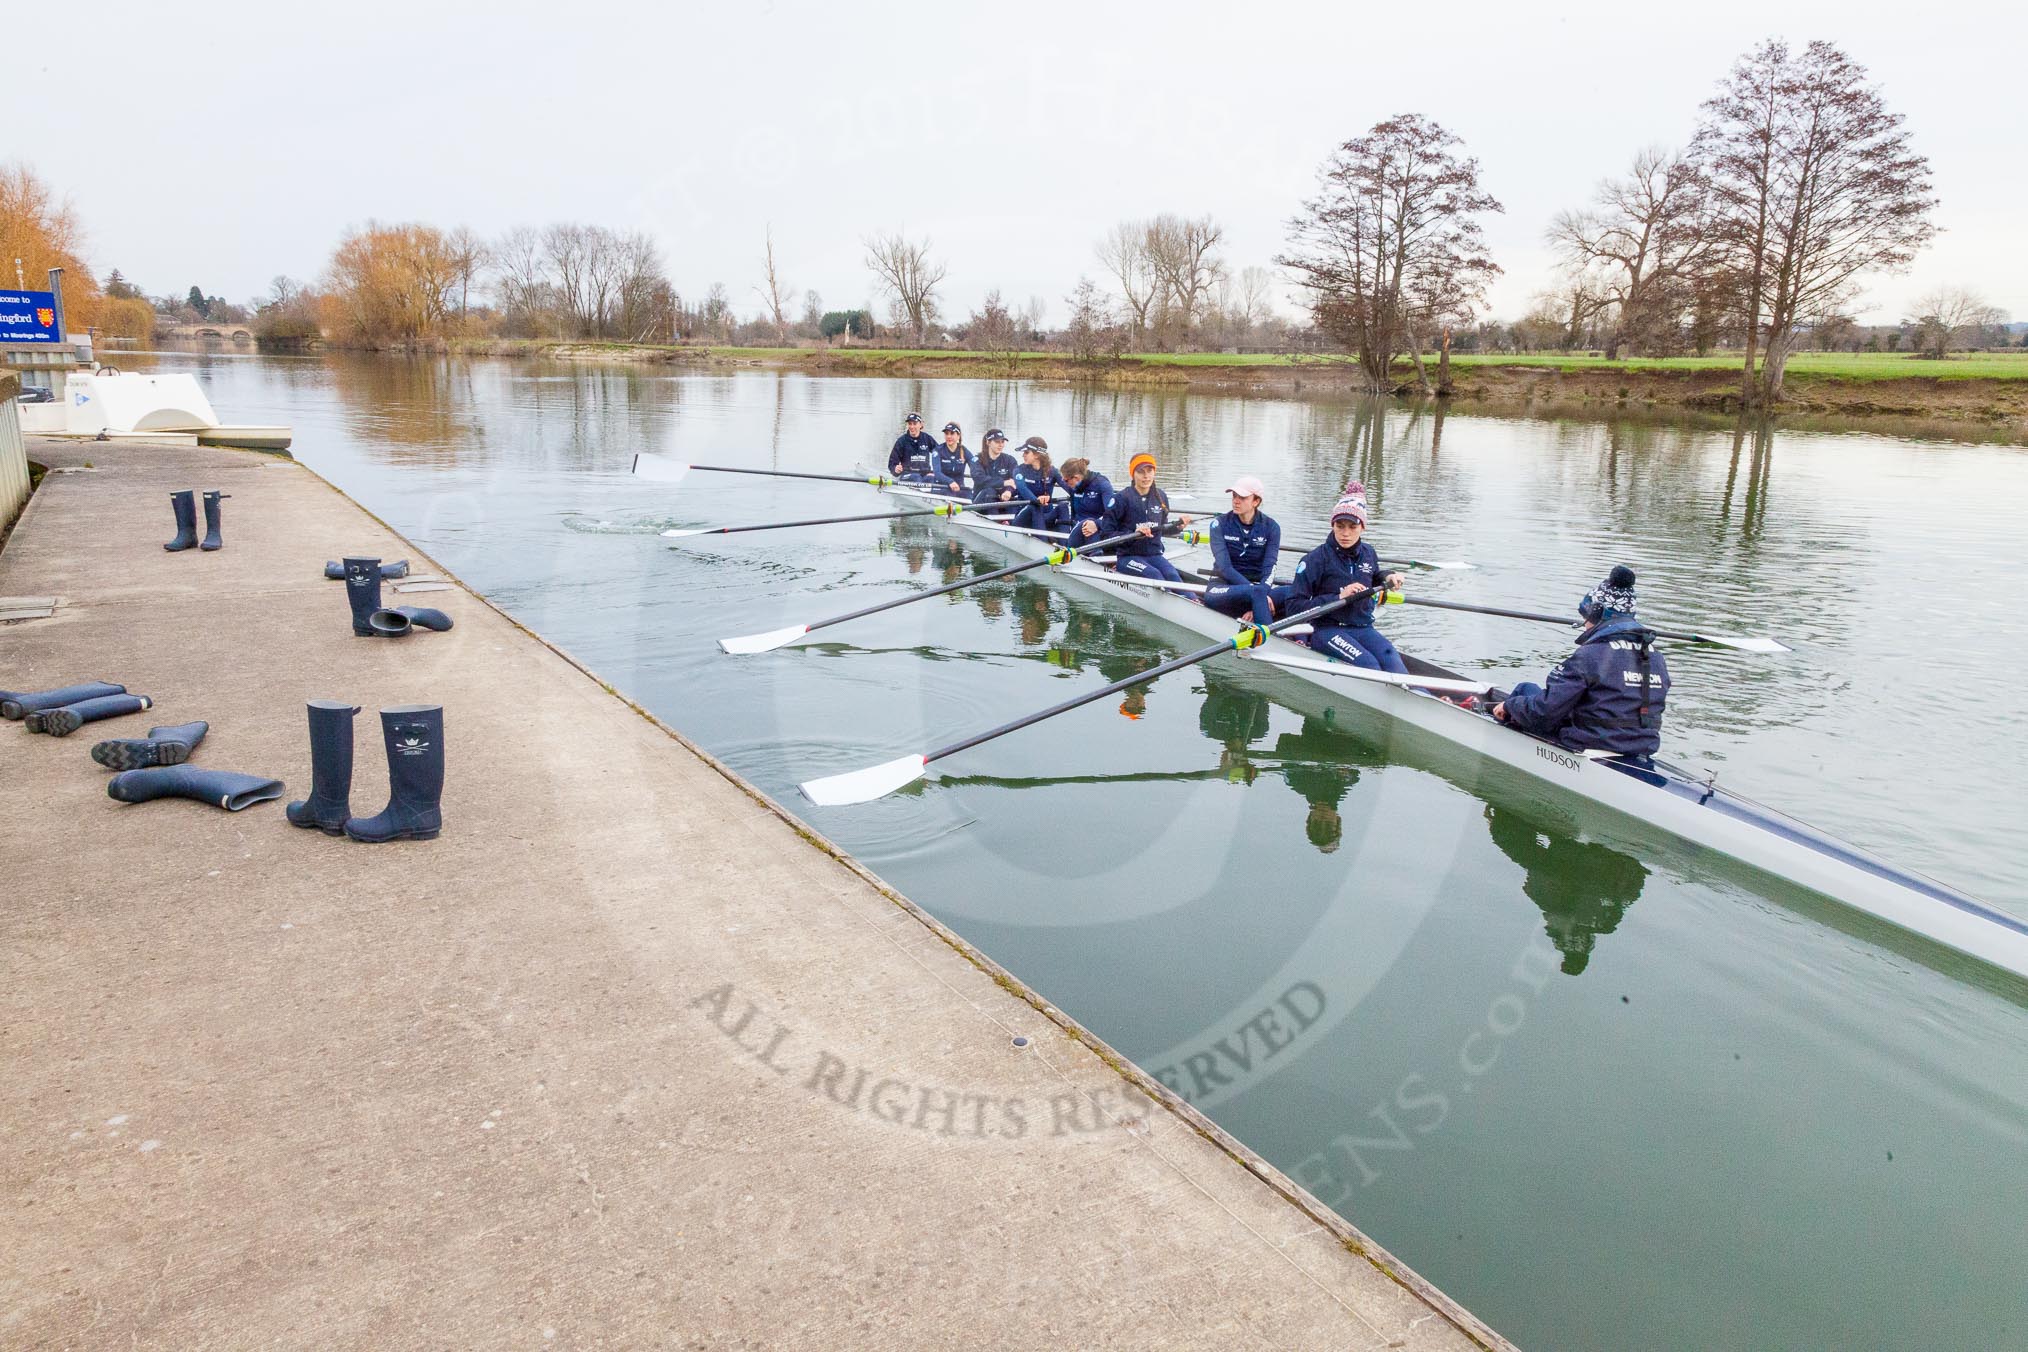 The Boat Race season 2016 - OUWBC training Wallingford: Osiris, the OUWBC reserve boat, with (from bow) Georgie Daniell, Issy Dodds, Chloe Farrar, Elettra Ardissino, Isa Von Loga, Rebecca Te Water Naude, Kate Erickson, Flo Pickles and cox Will Smith.
River Thames,
Wallingford,
Oxfordshire,

on 29 February 2016 at 15:20, image #43